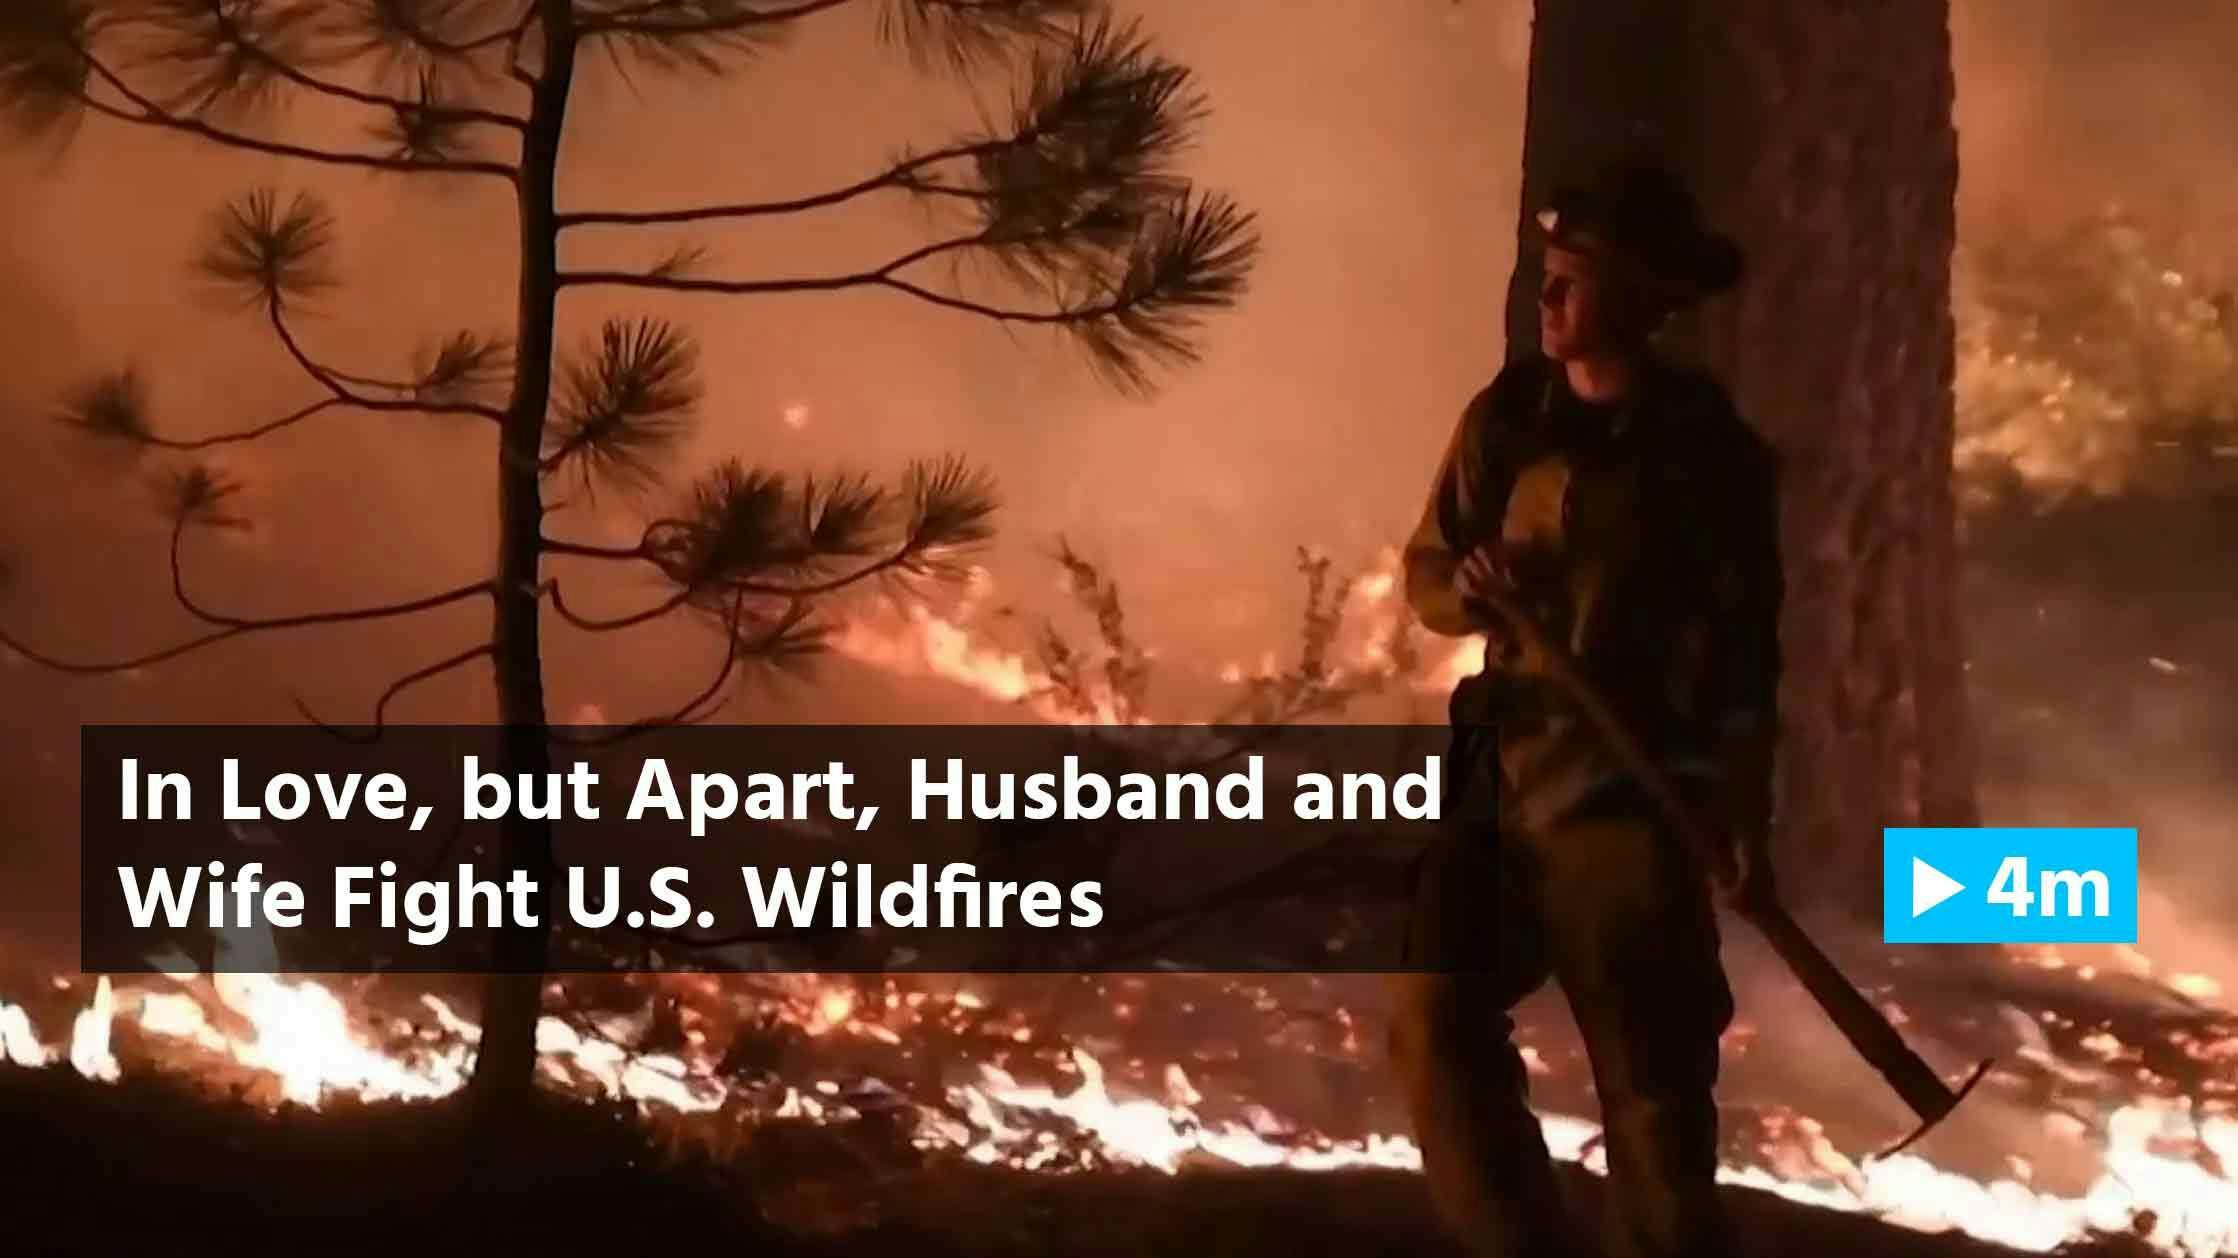 Reuters Report: In love, but apart, husband and wife fight U.S. wildfires